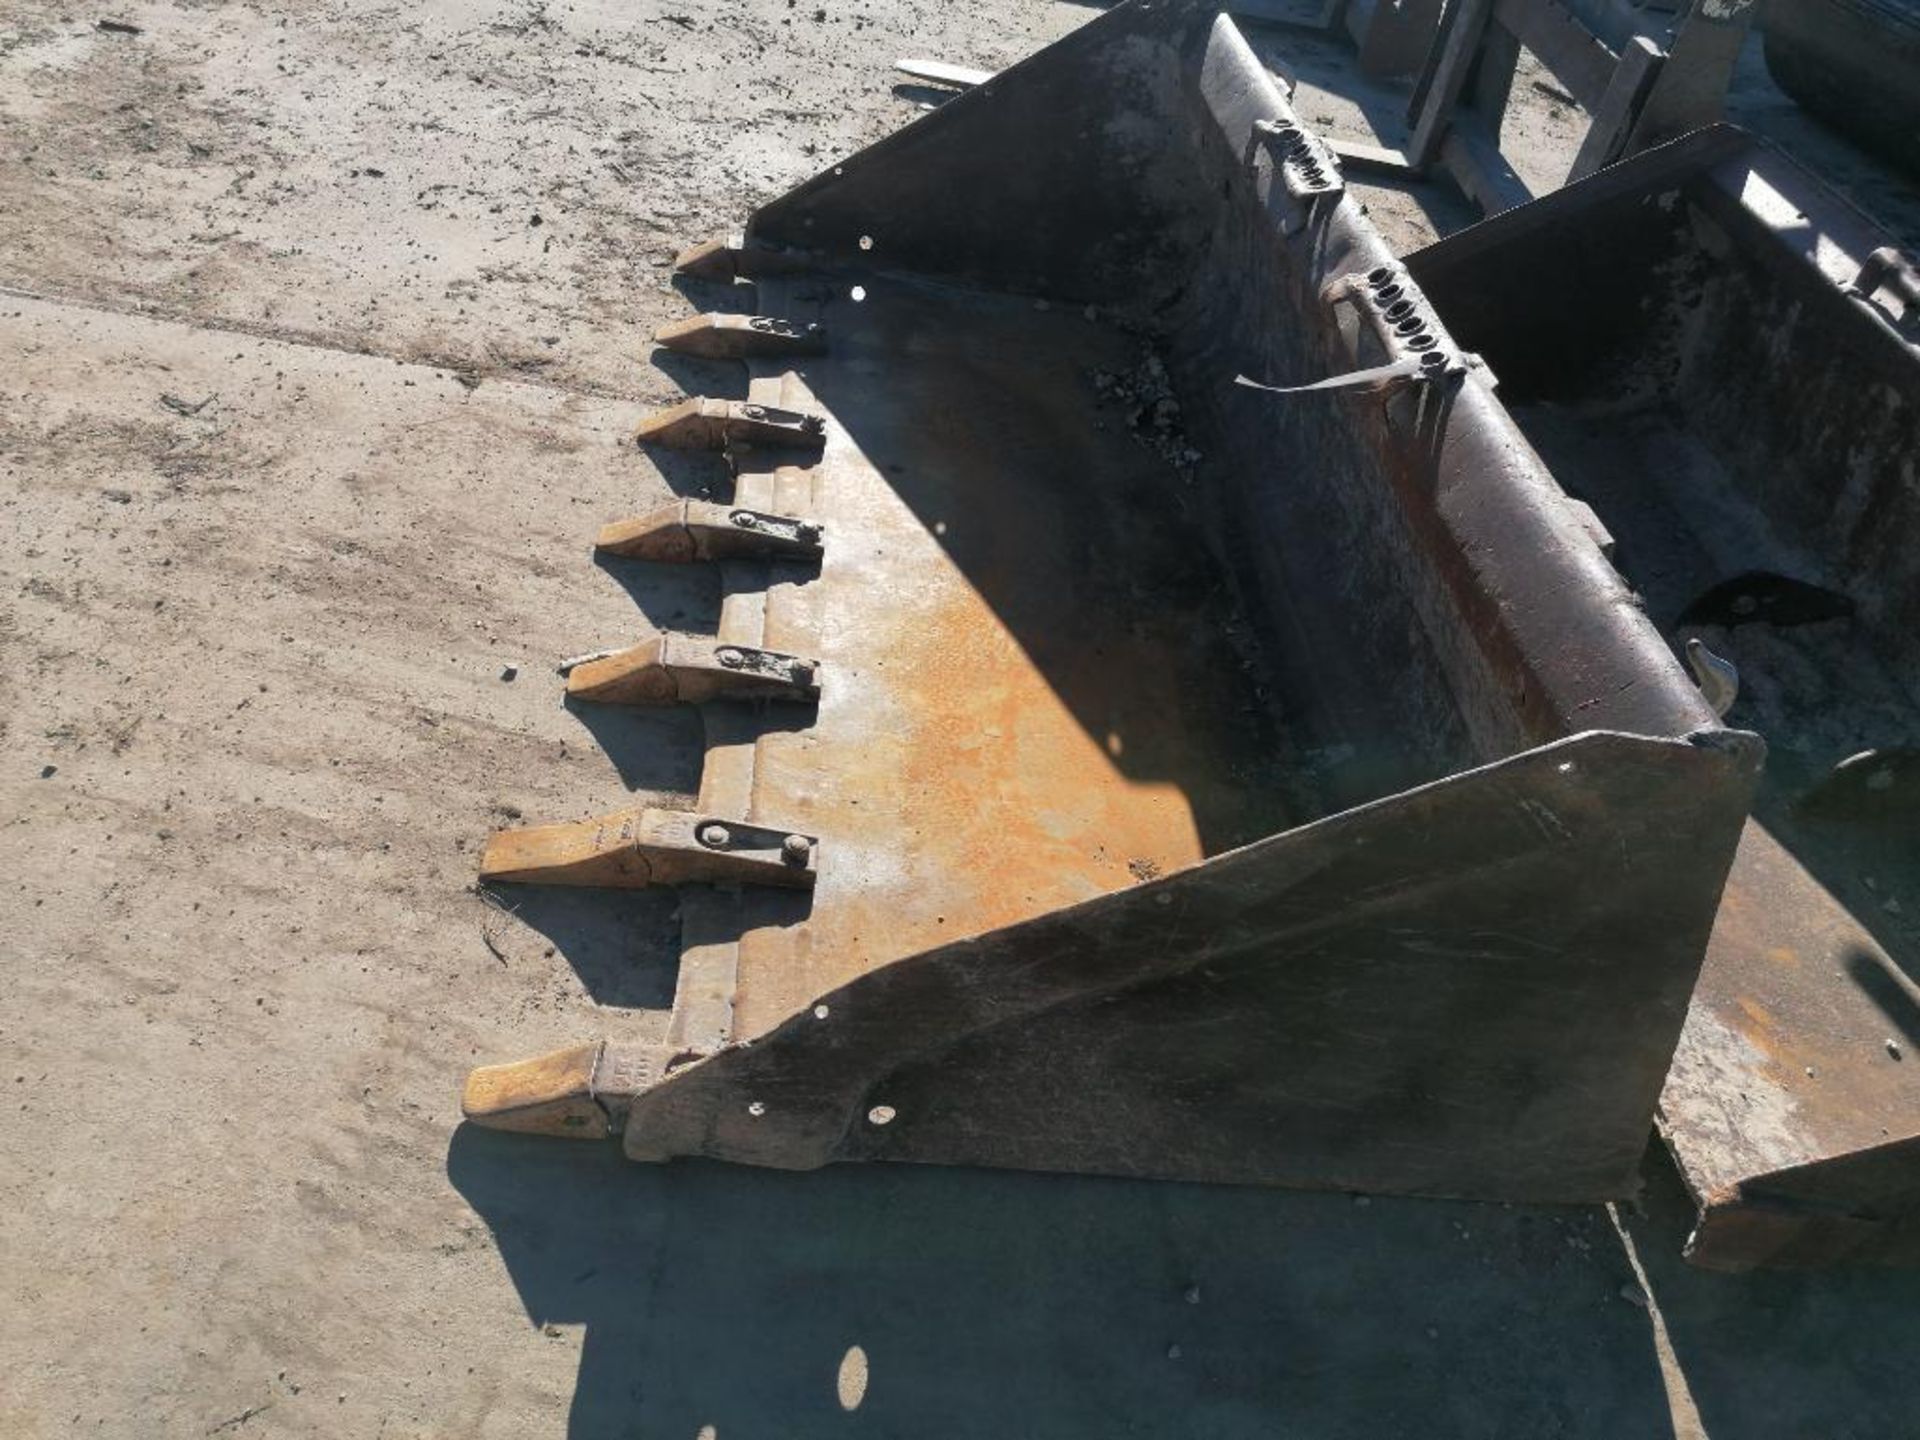 Skid Steer 5' Bucket Attachment. Located in Hazelwood, MO - Image 2 of 5